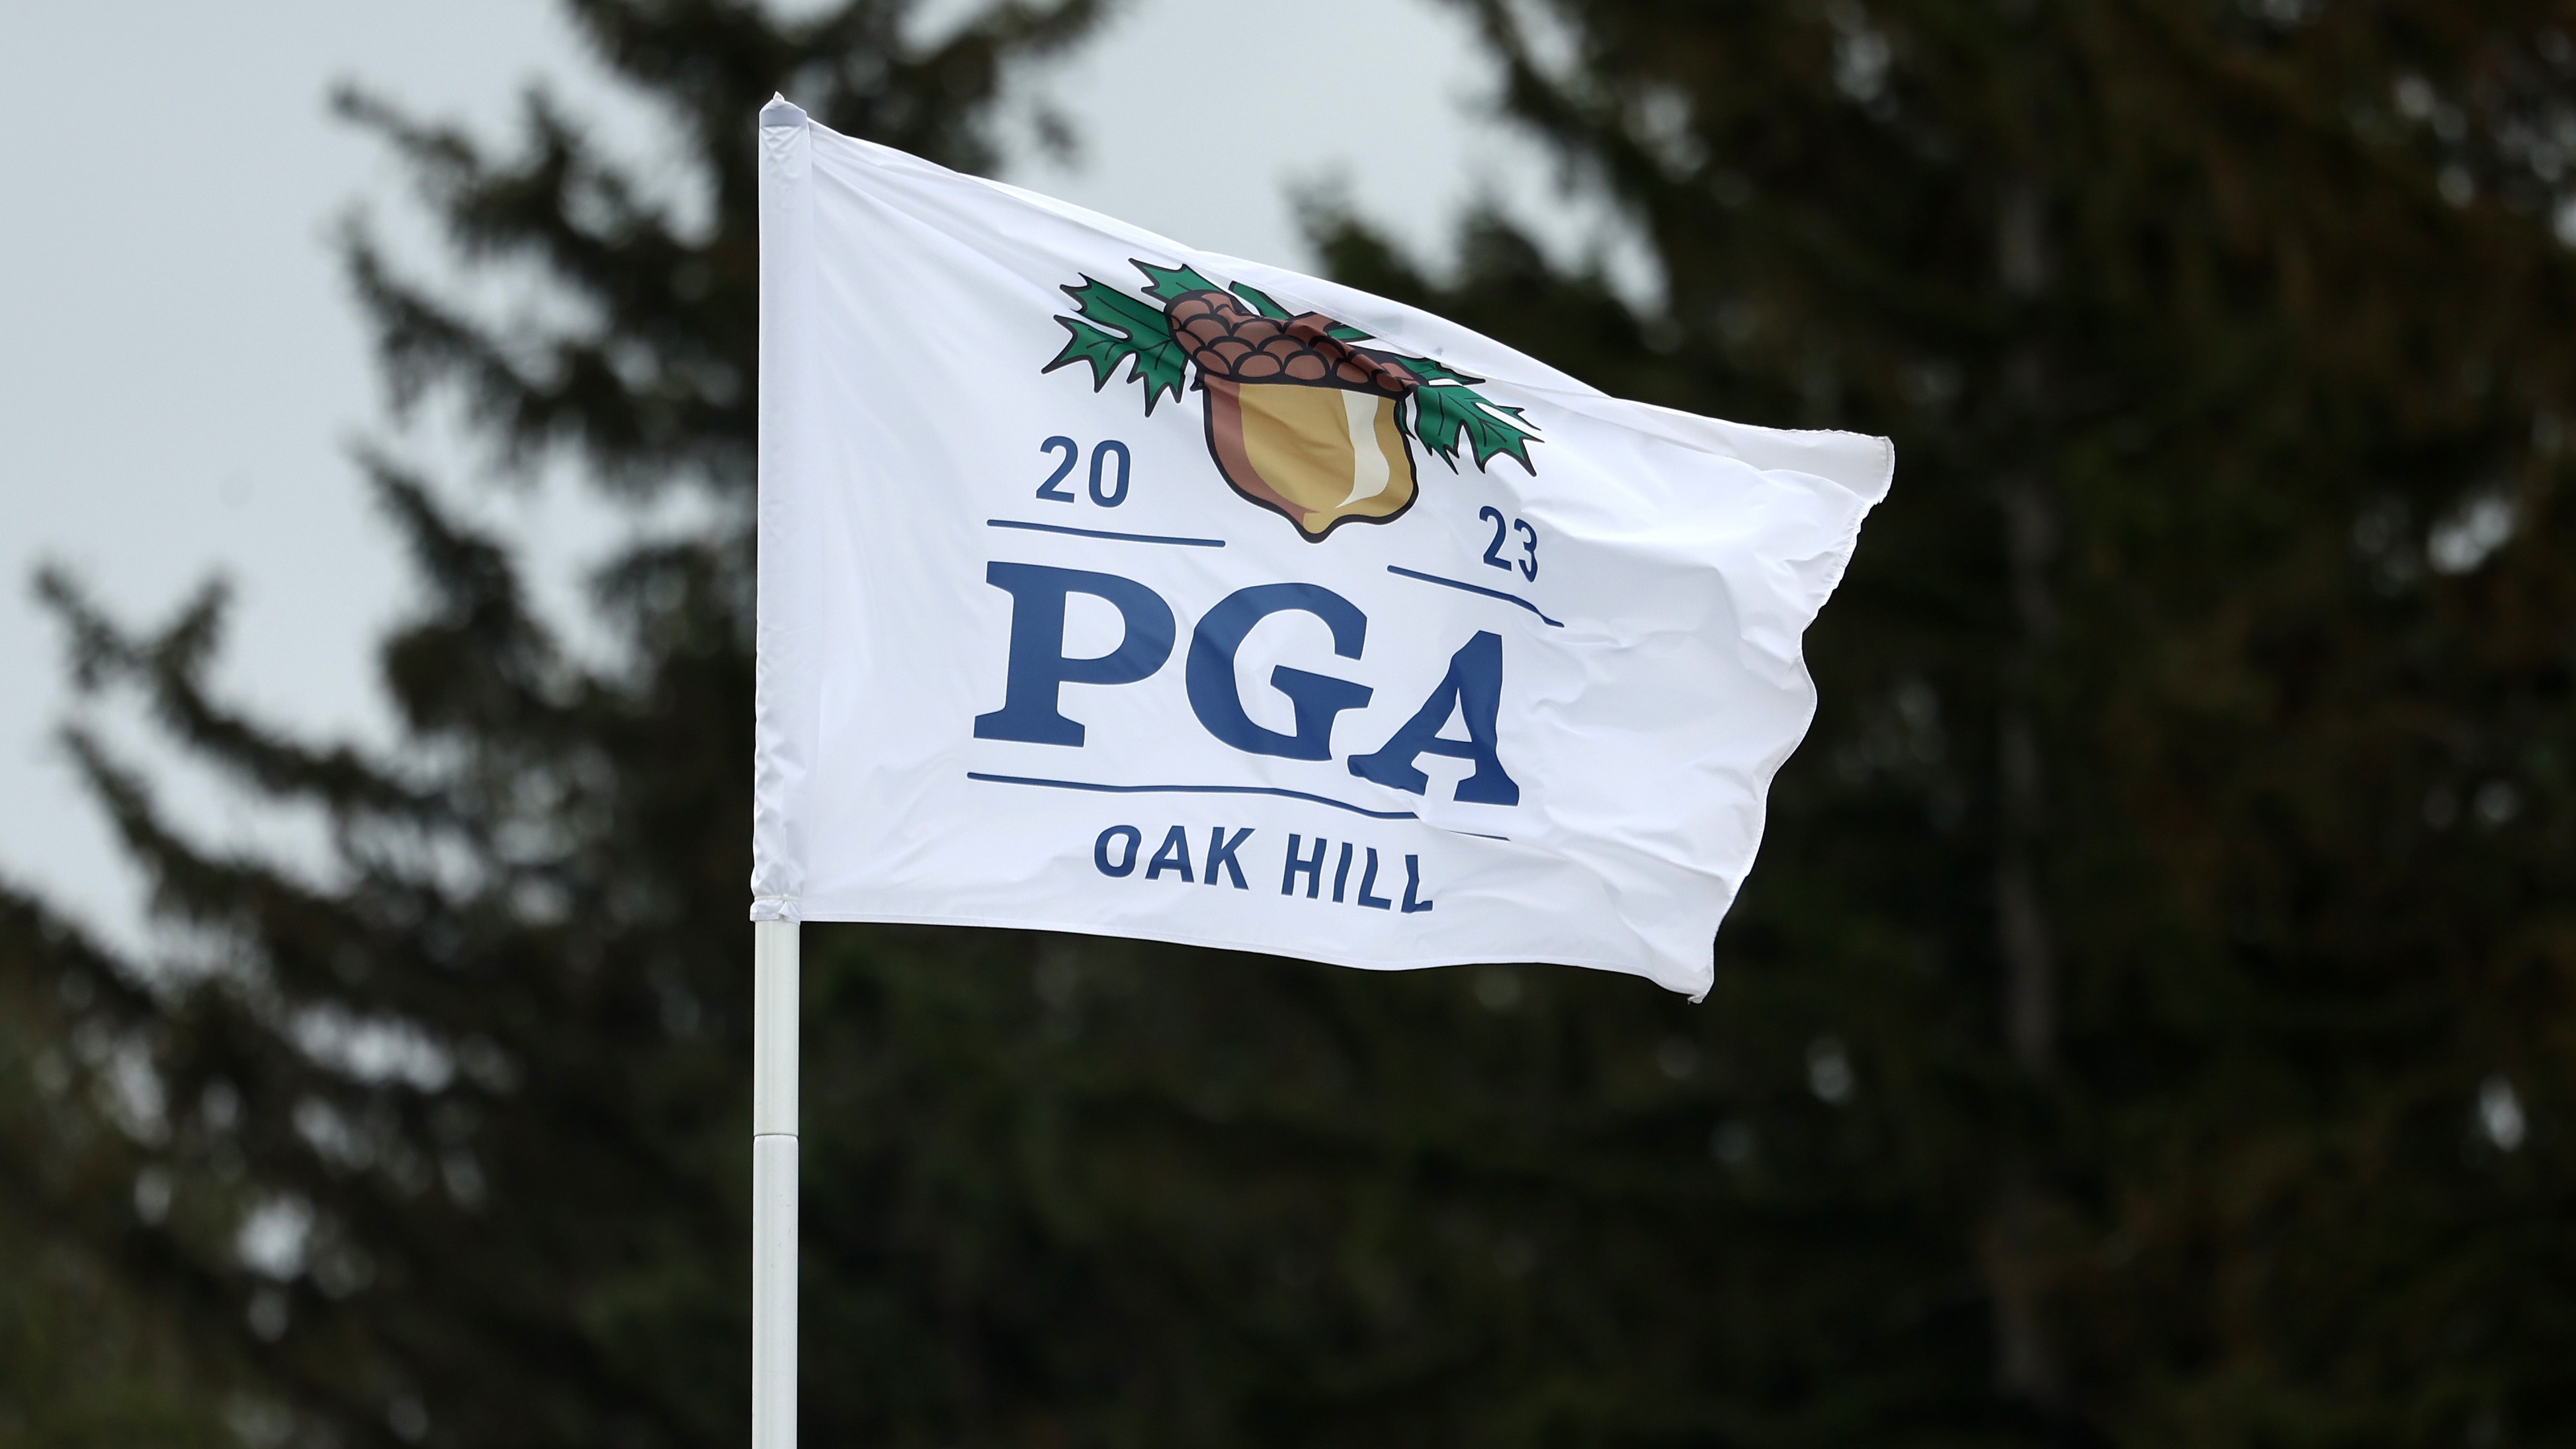 PGA Championship Round 2 Tee Times, Leaderboard and More